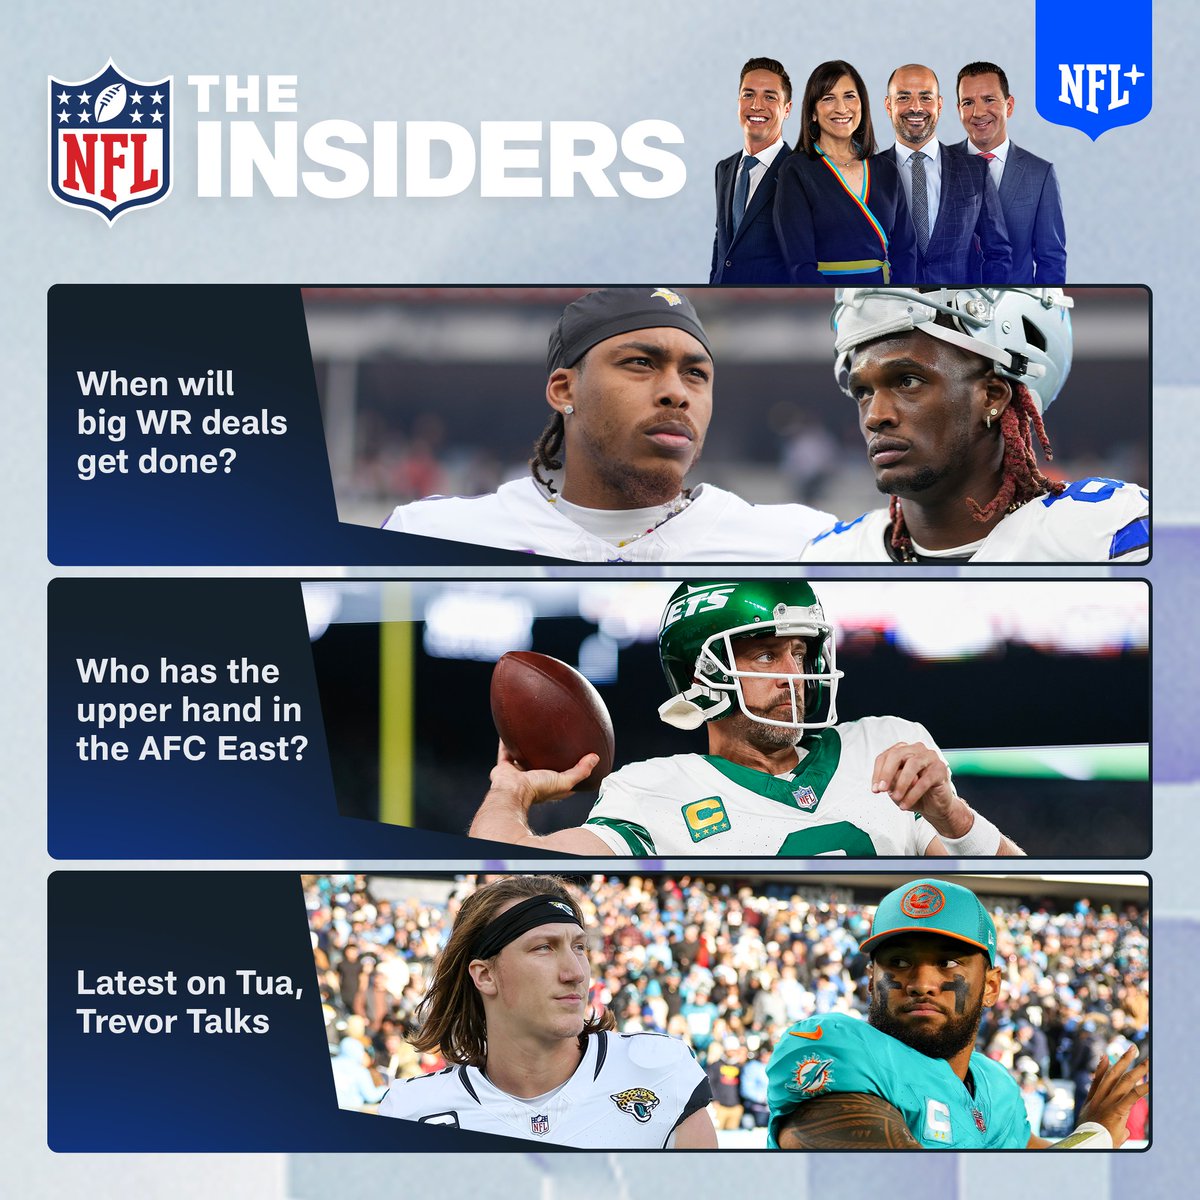 Your home for all things football. 🏈 You won’t want to miss today’s episode of The Insiders at 7pm ET on NFL Network. 🚨 @TomPelissero | @judybattista | @MikeGarafolo | @RapSheet